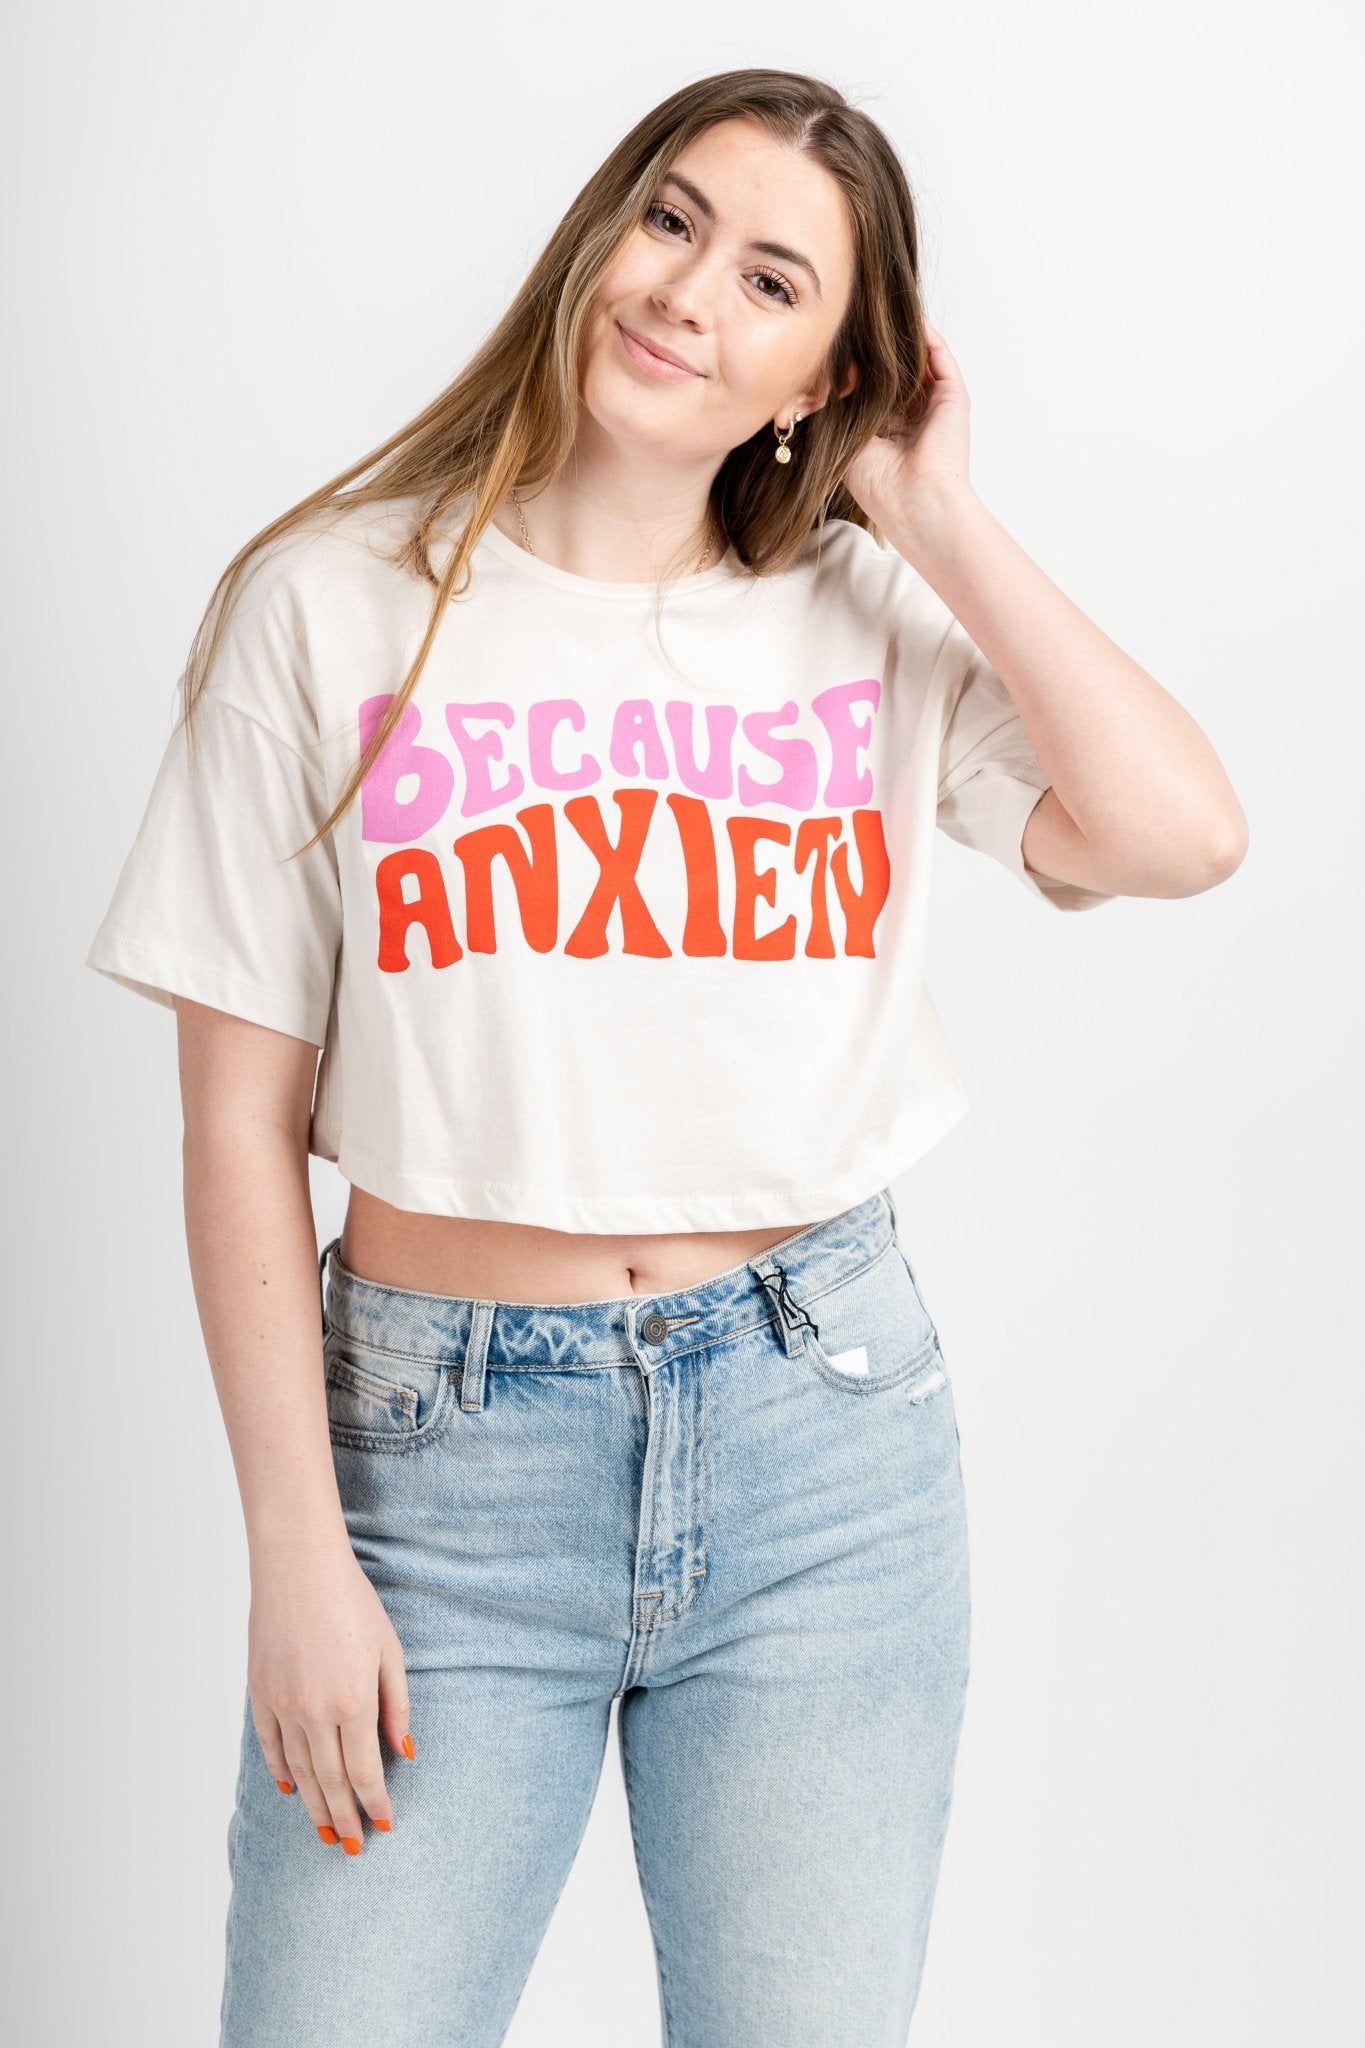 Because anxiety crop tee white - Cute T-shirts - Funny T-Shirts at Lush Fashion Lounge Boutique in Oklahoma City